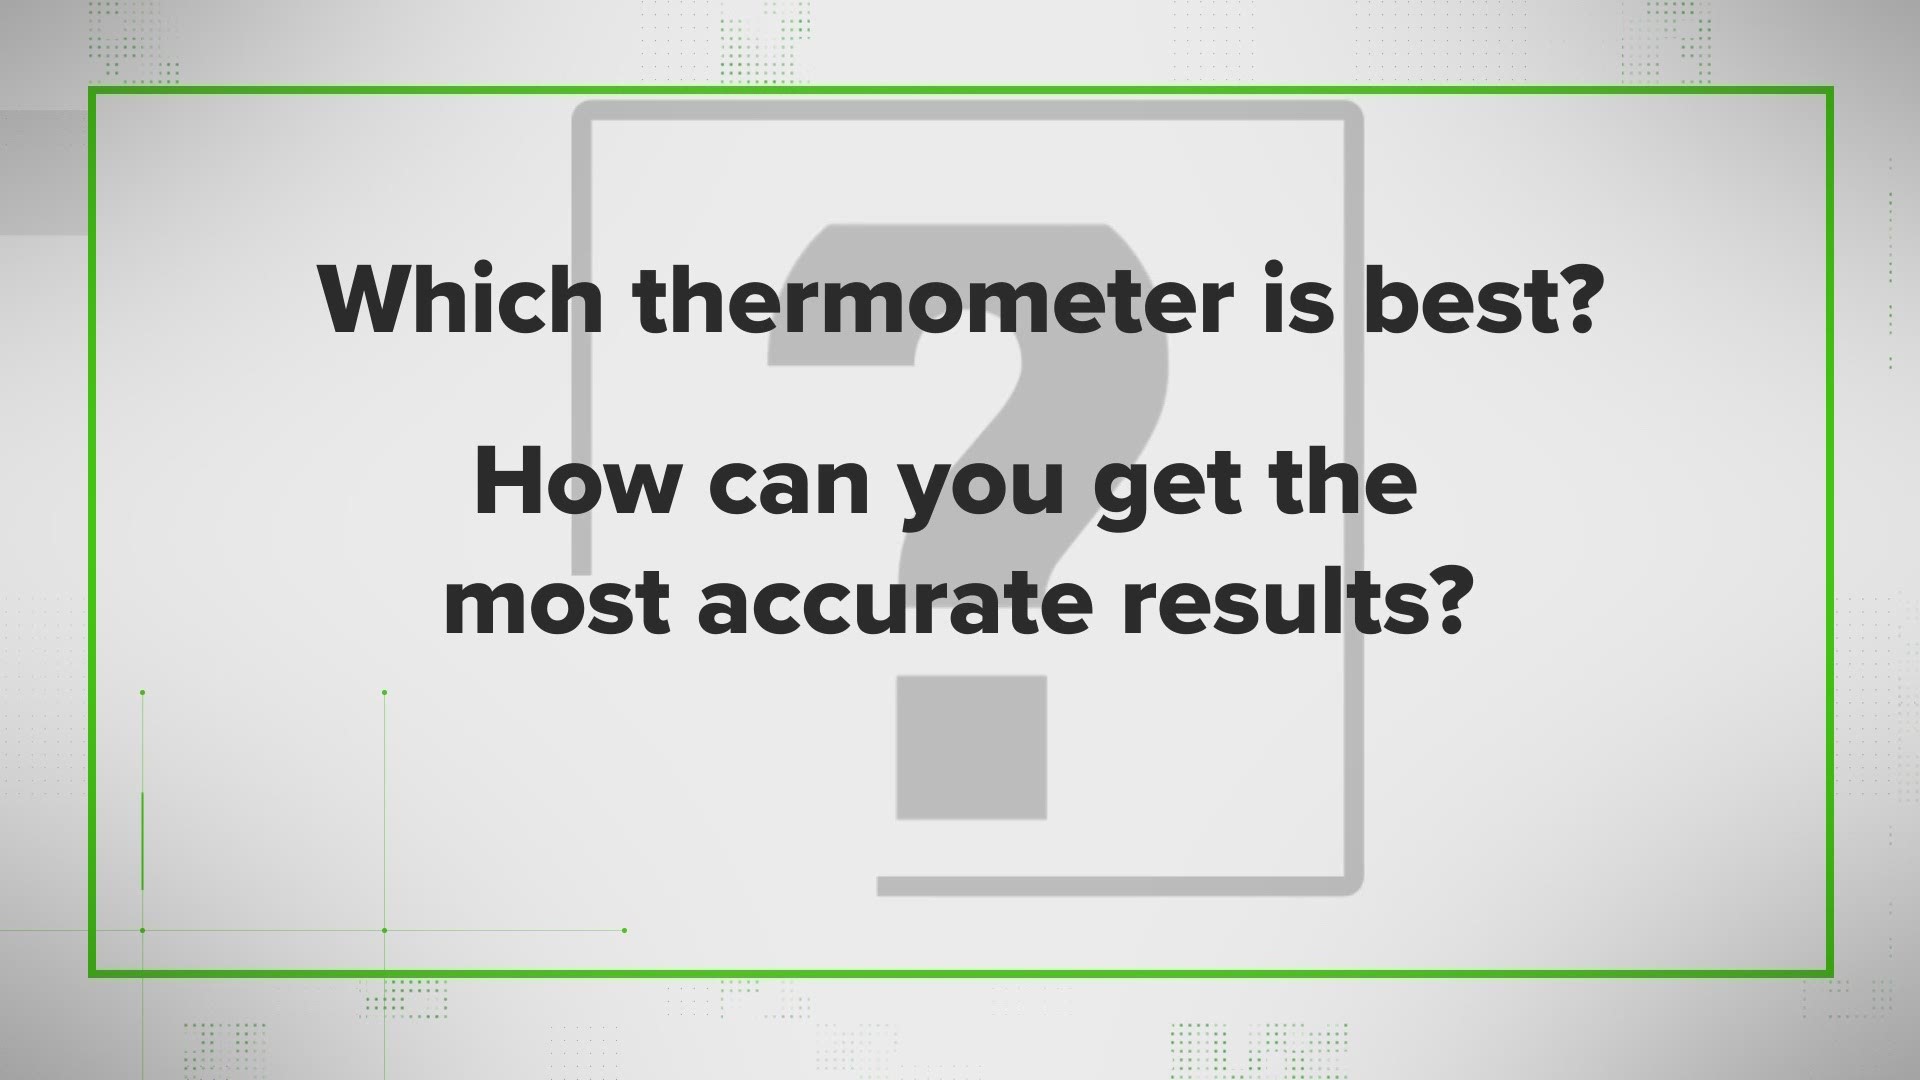 Search online and.there are lots of thermometers you can buy - so which is best? And how can you get the most accurate results?